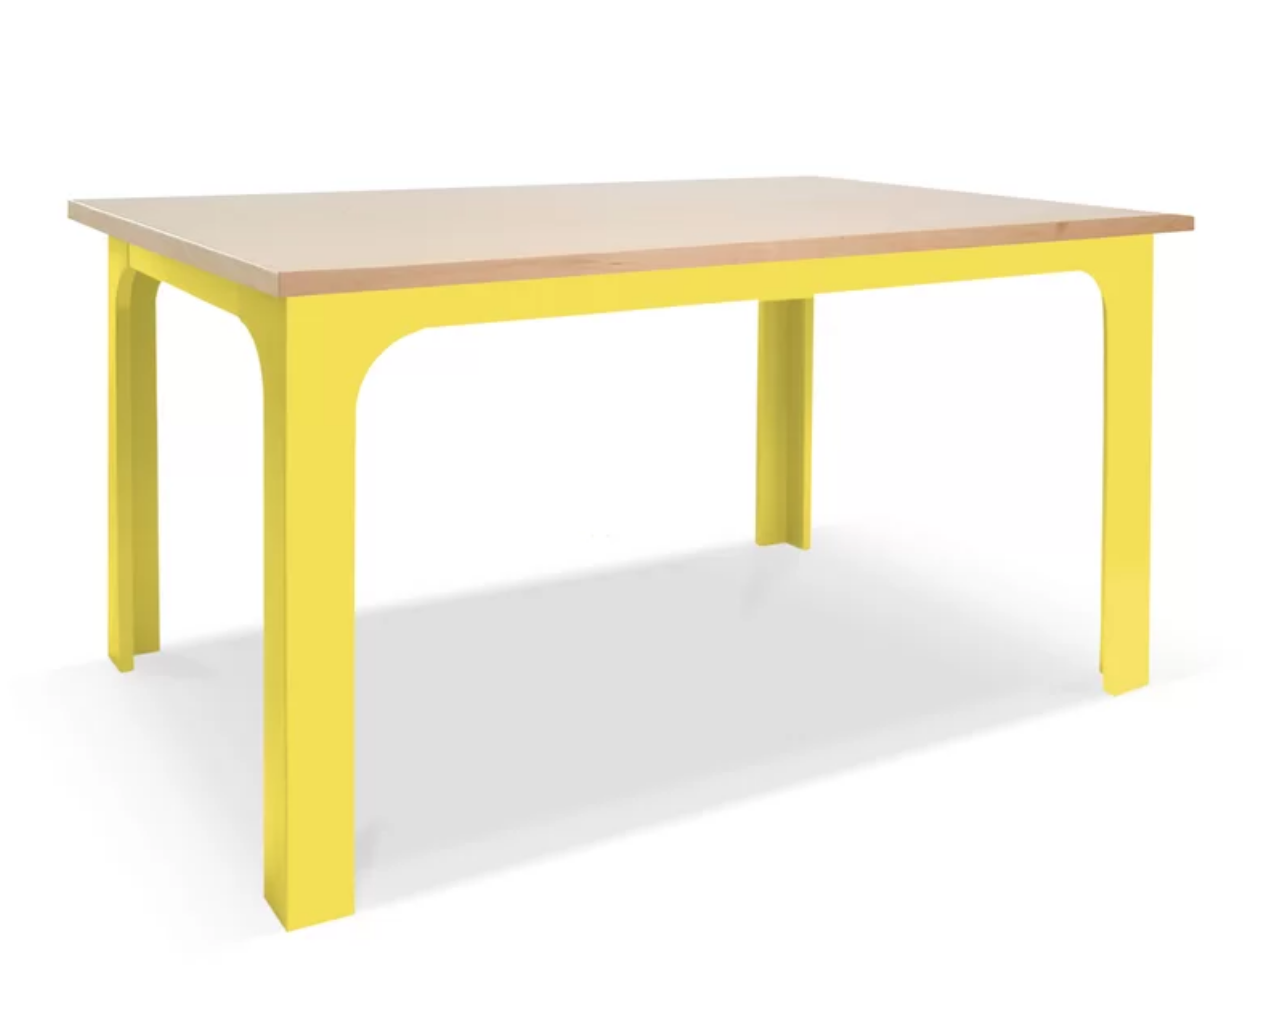 16 OF OUR FAVOURITE PLAY TABLES FOR KIDS — WINTER DAISY